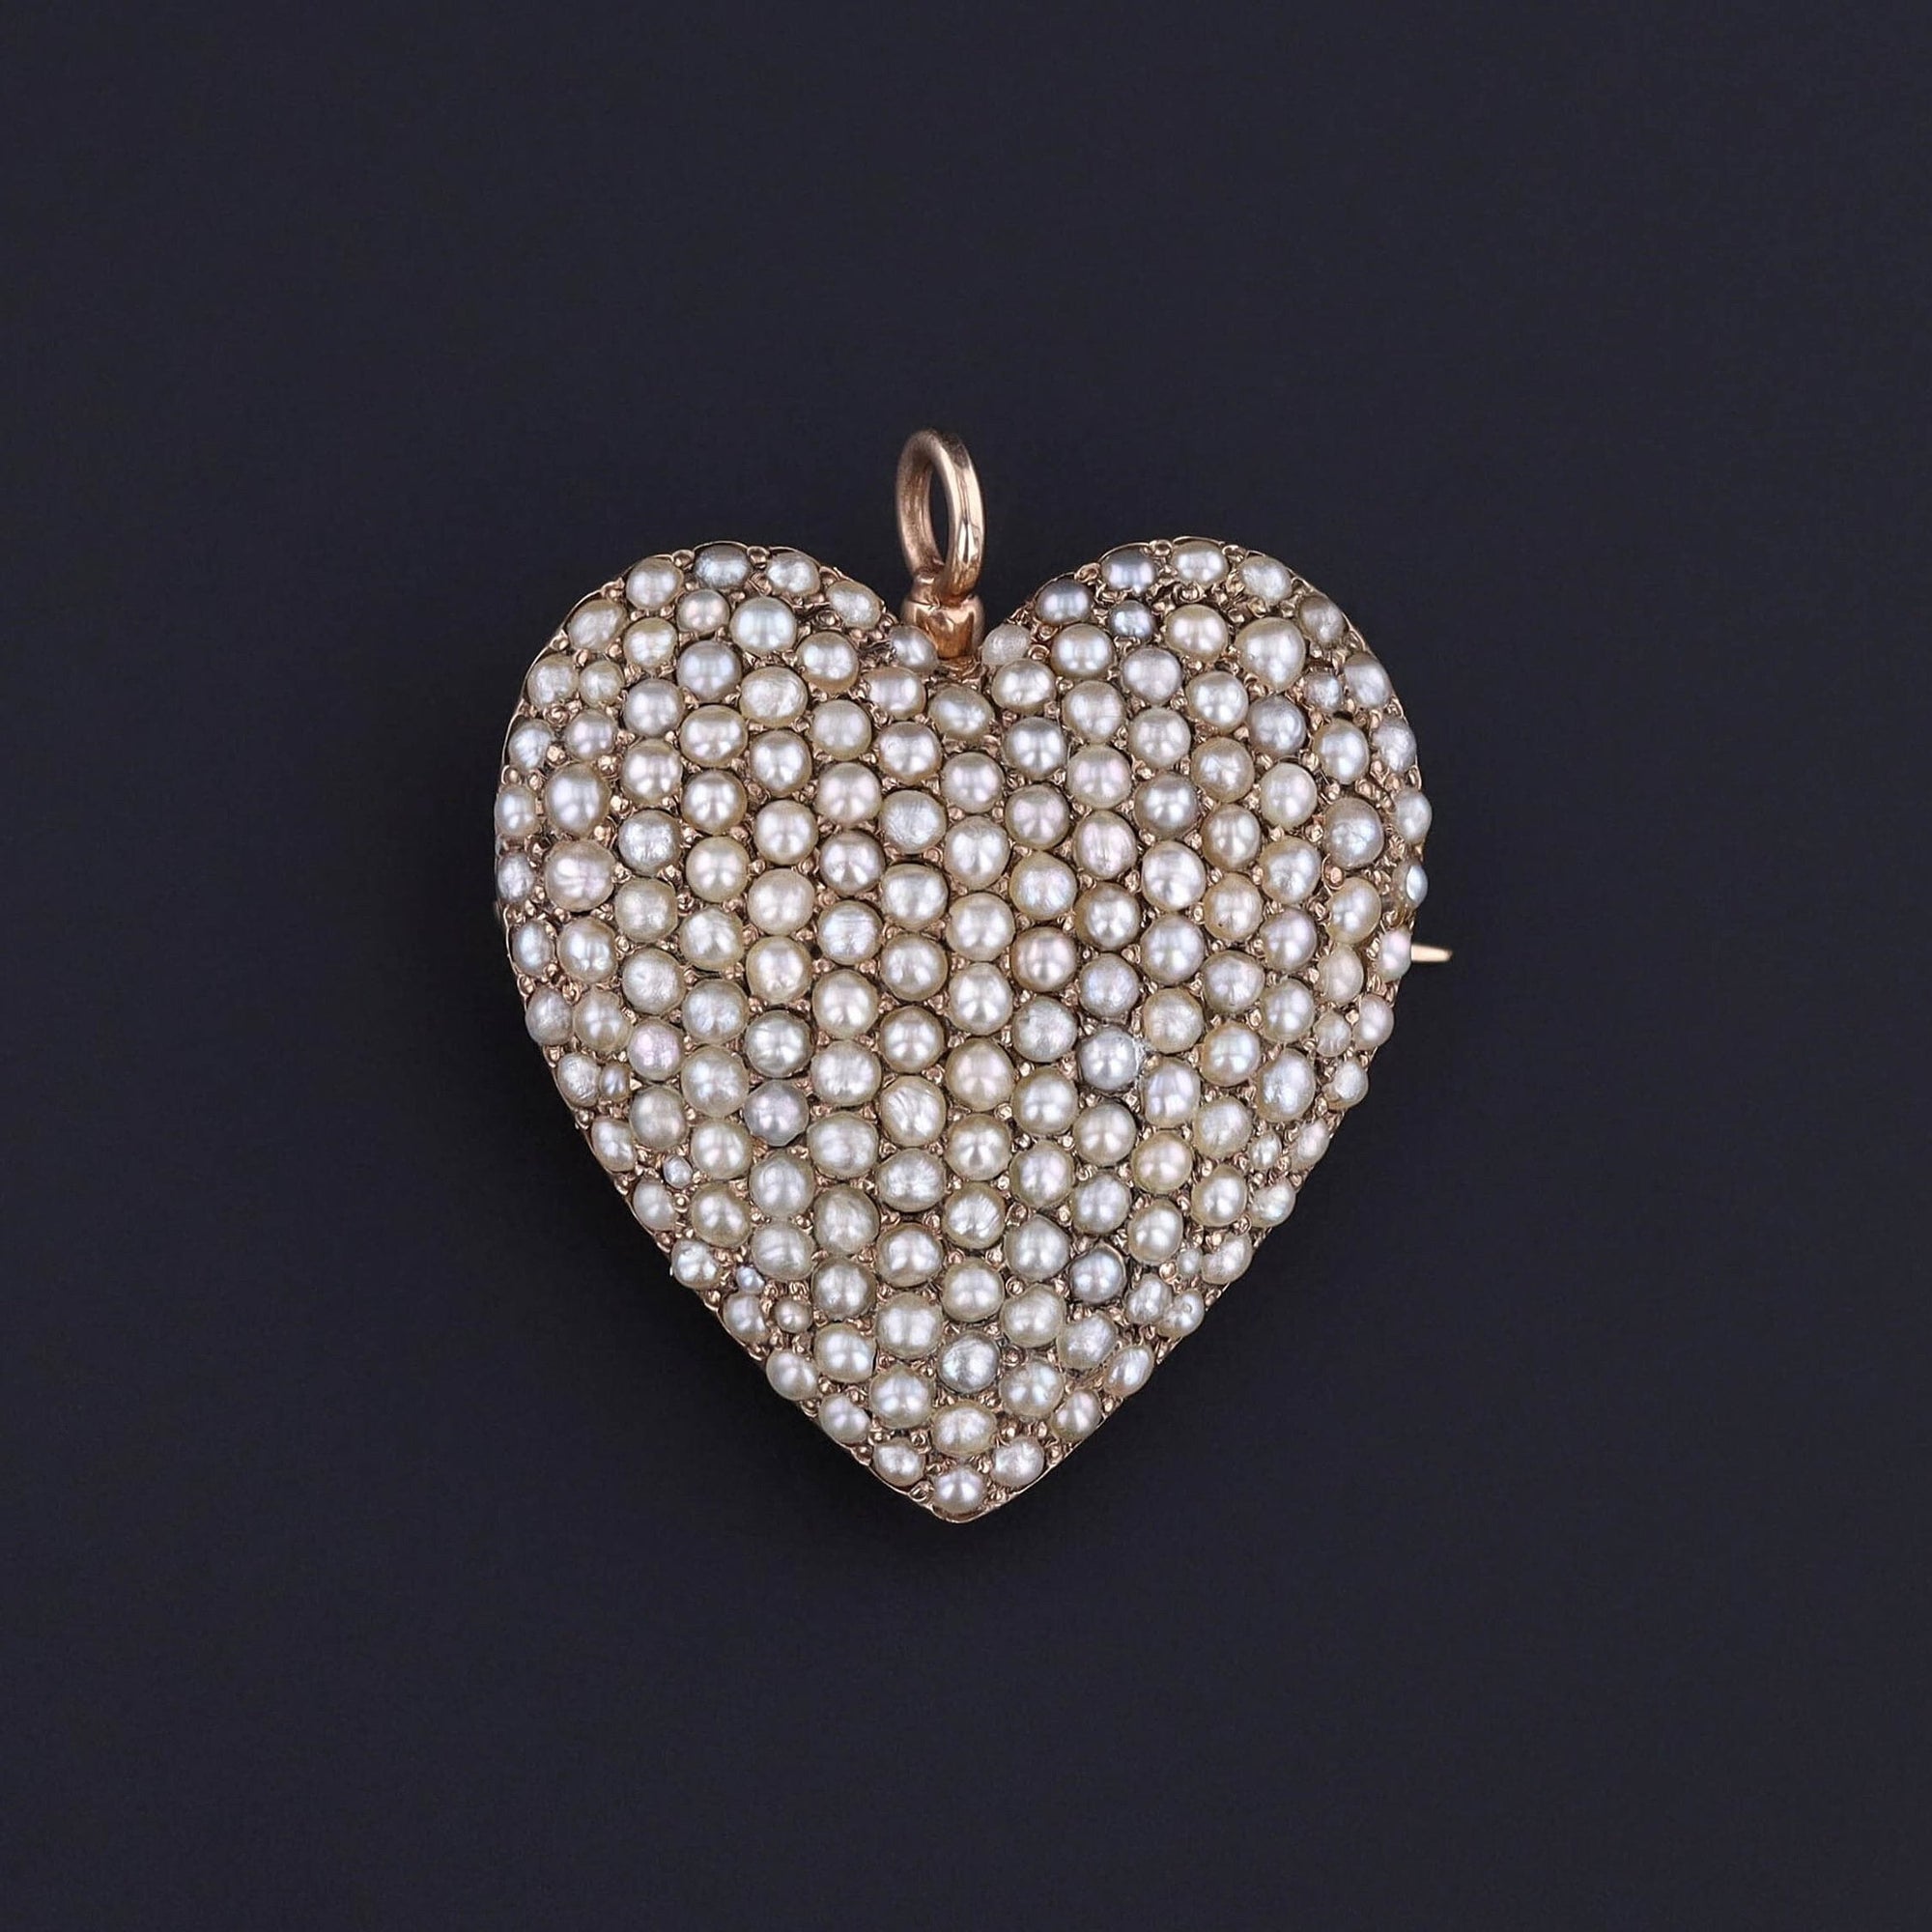 Antique Pearl Heart Pendant or Brooch of 10k Gold